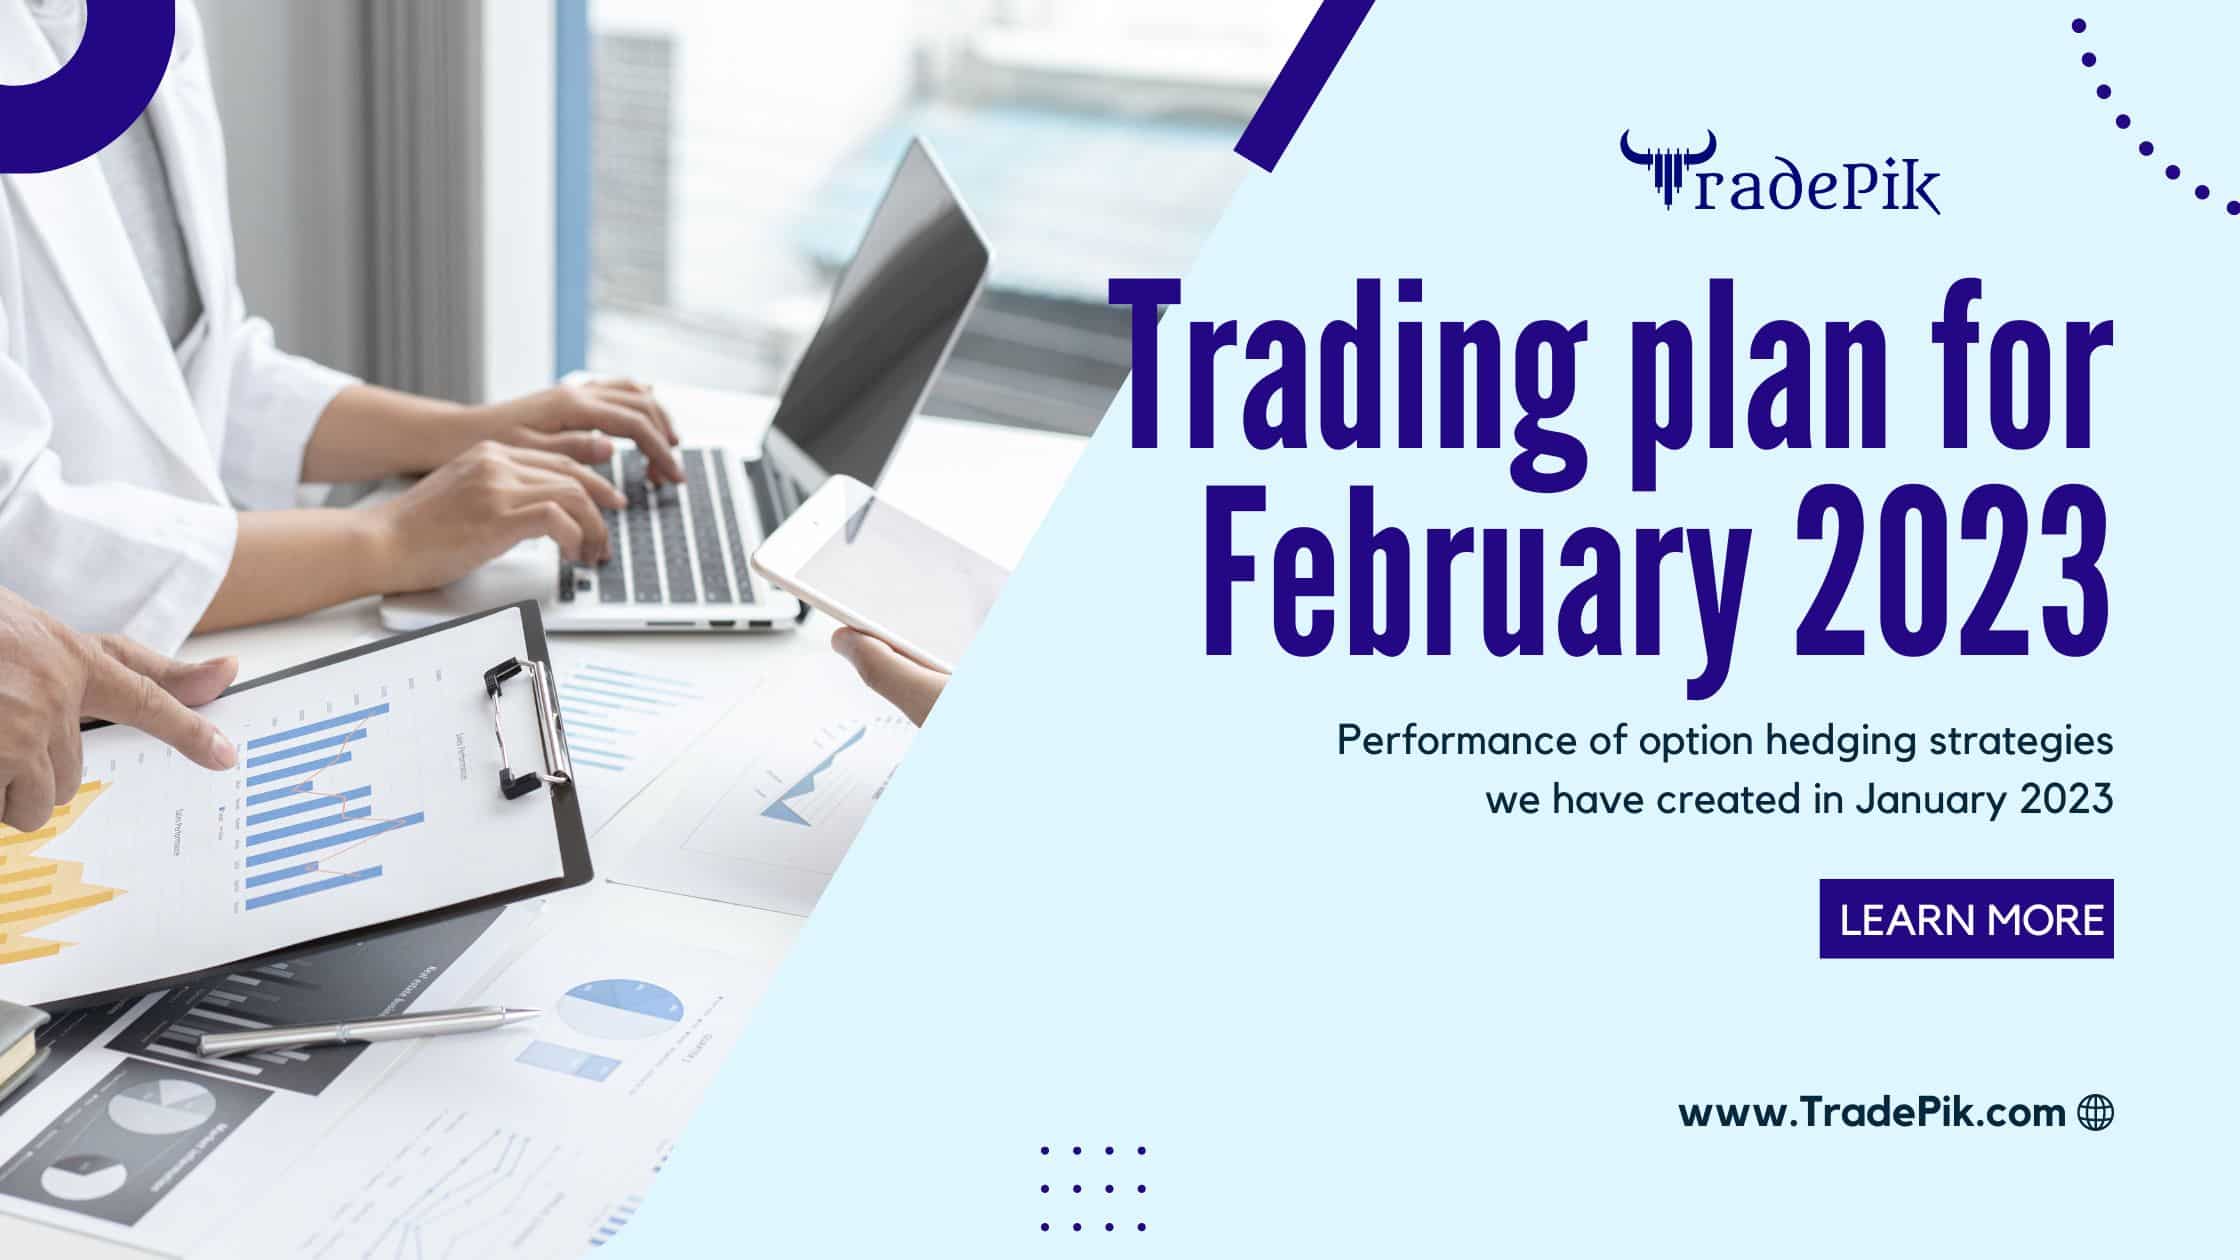 January Month Performance and trading plan for February 2023 expiry